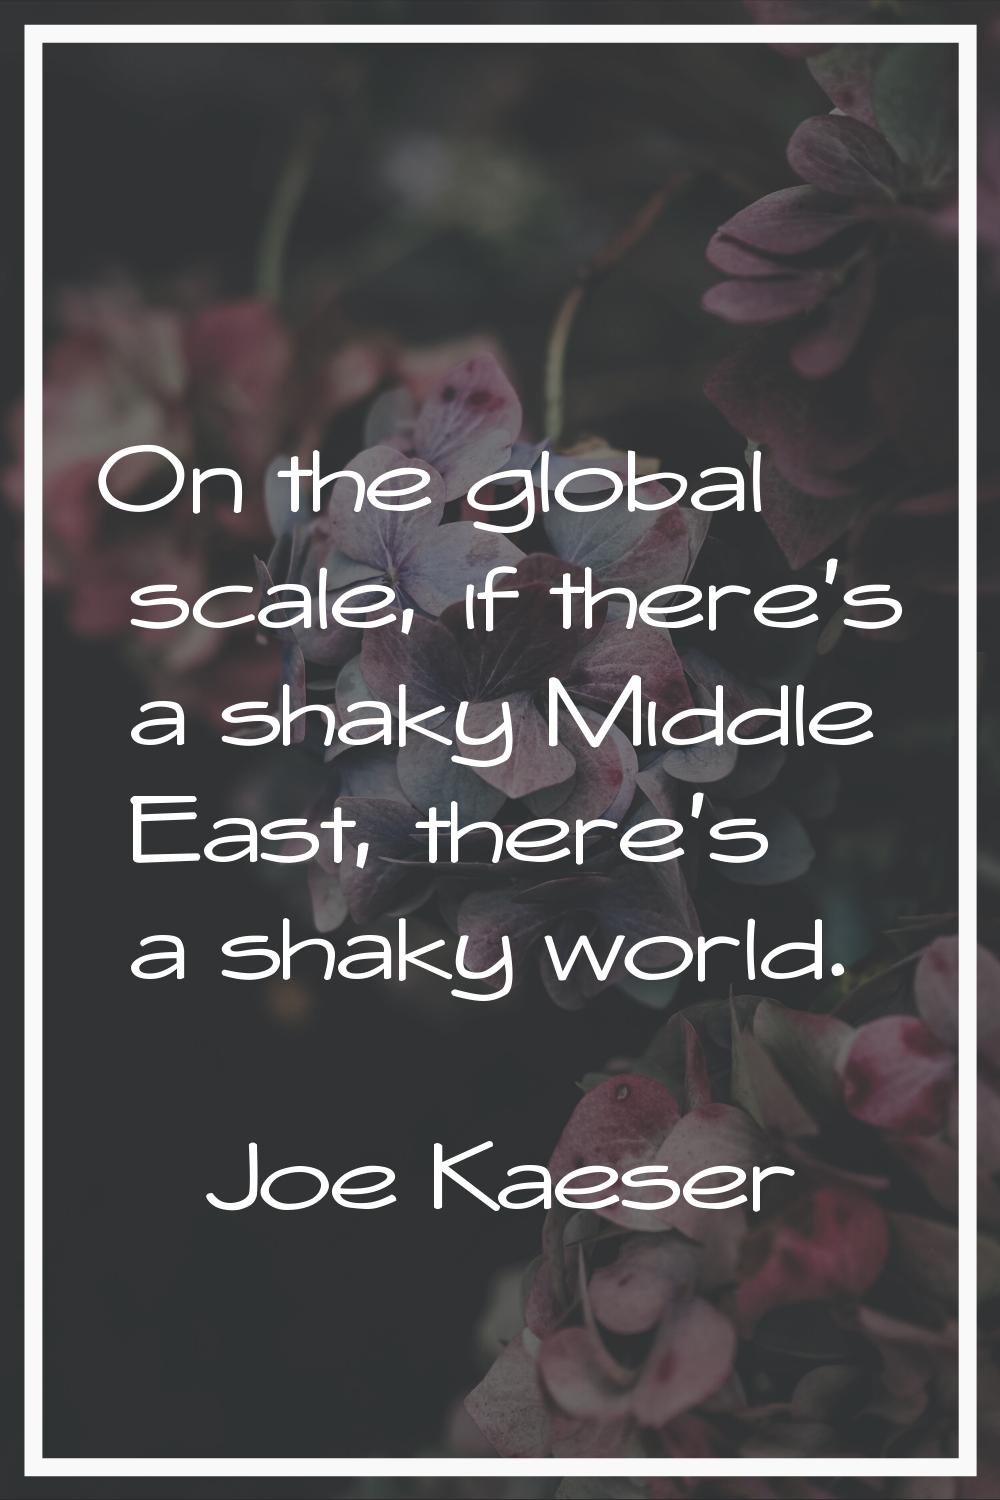 On the global scale, if there's a shaky Middle East, there's a shaky world.